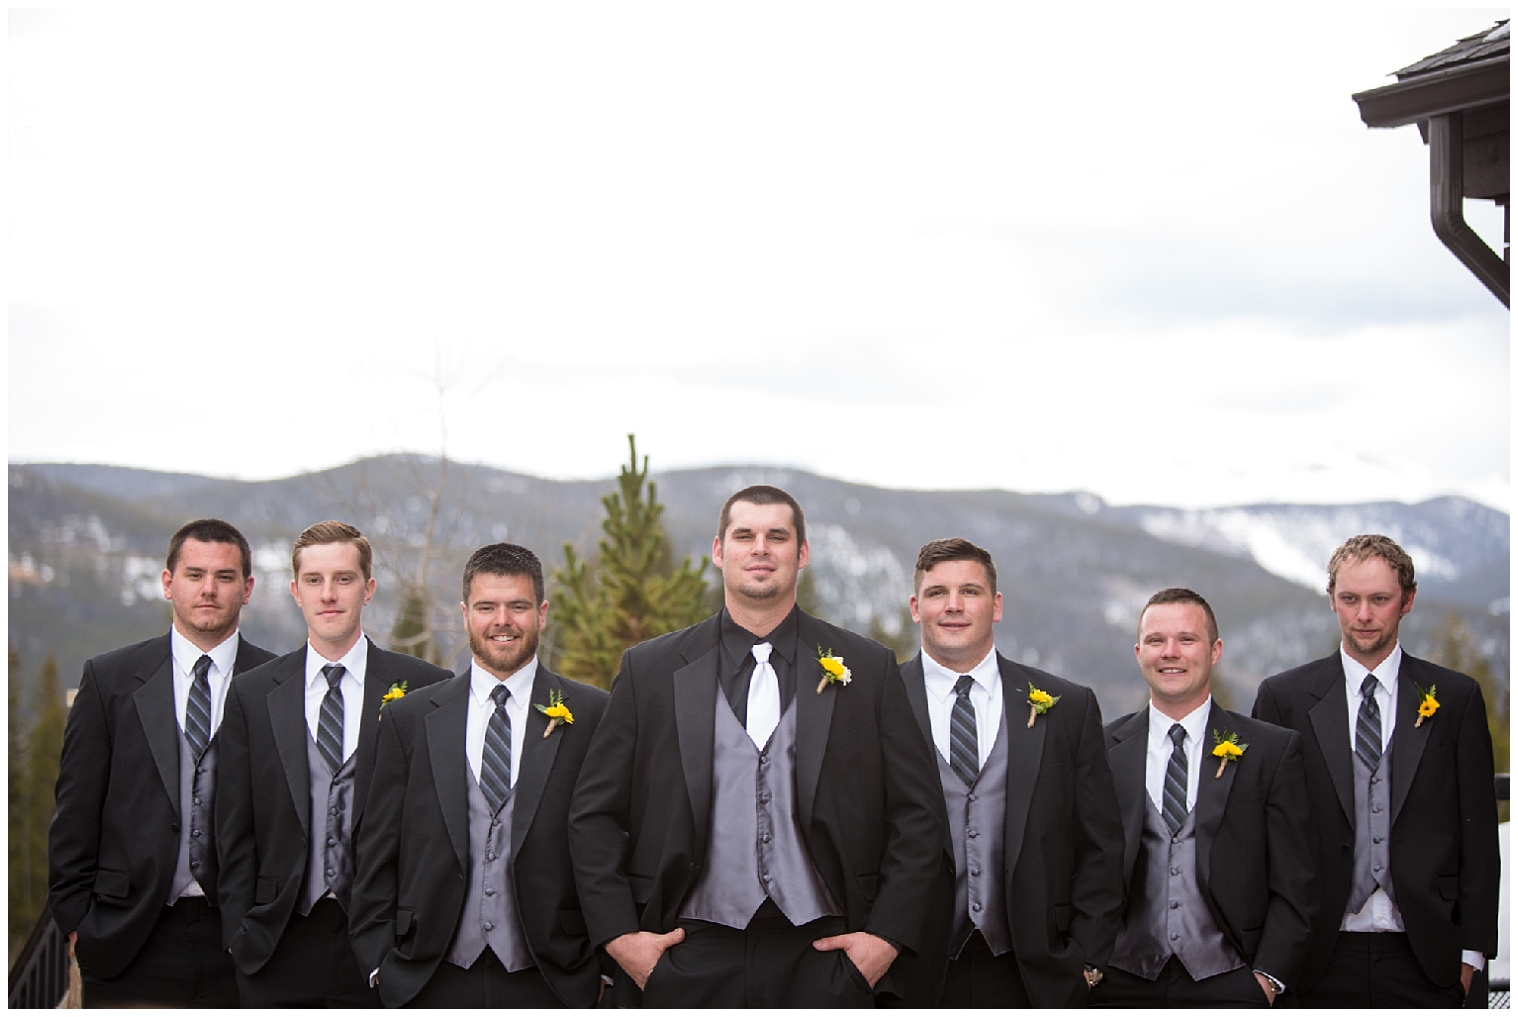 Formal portrait of the groom with his groomsmen, at a mountain Colorado wedding.